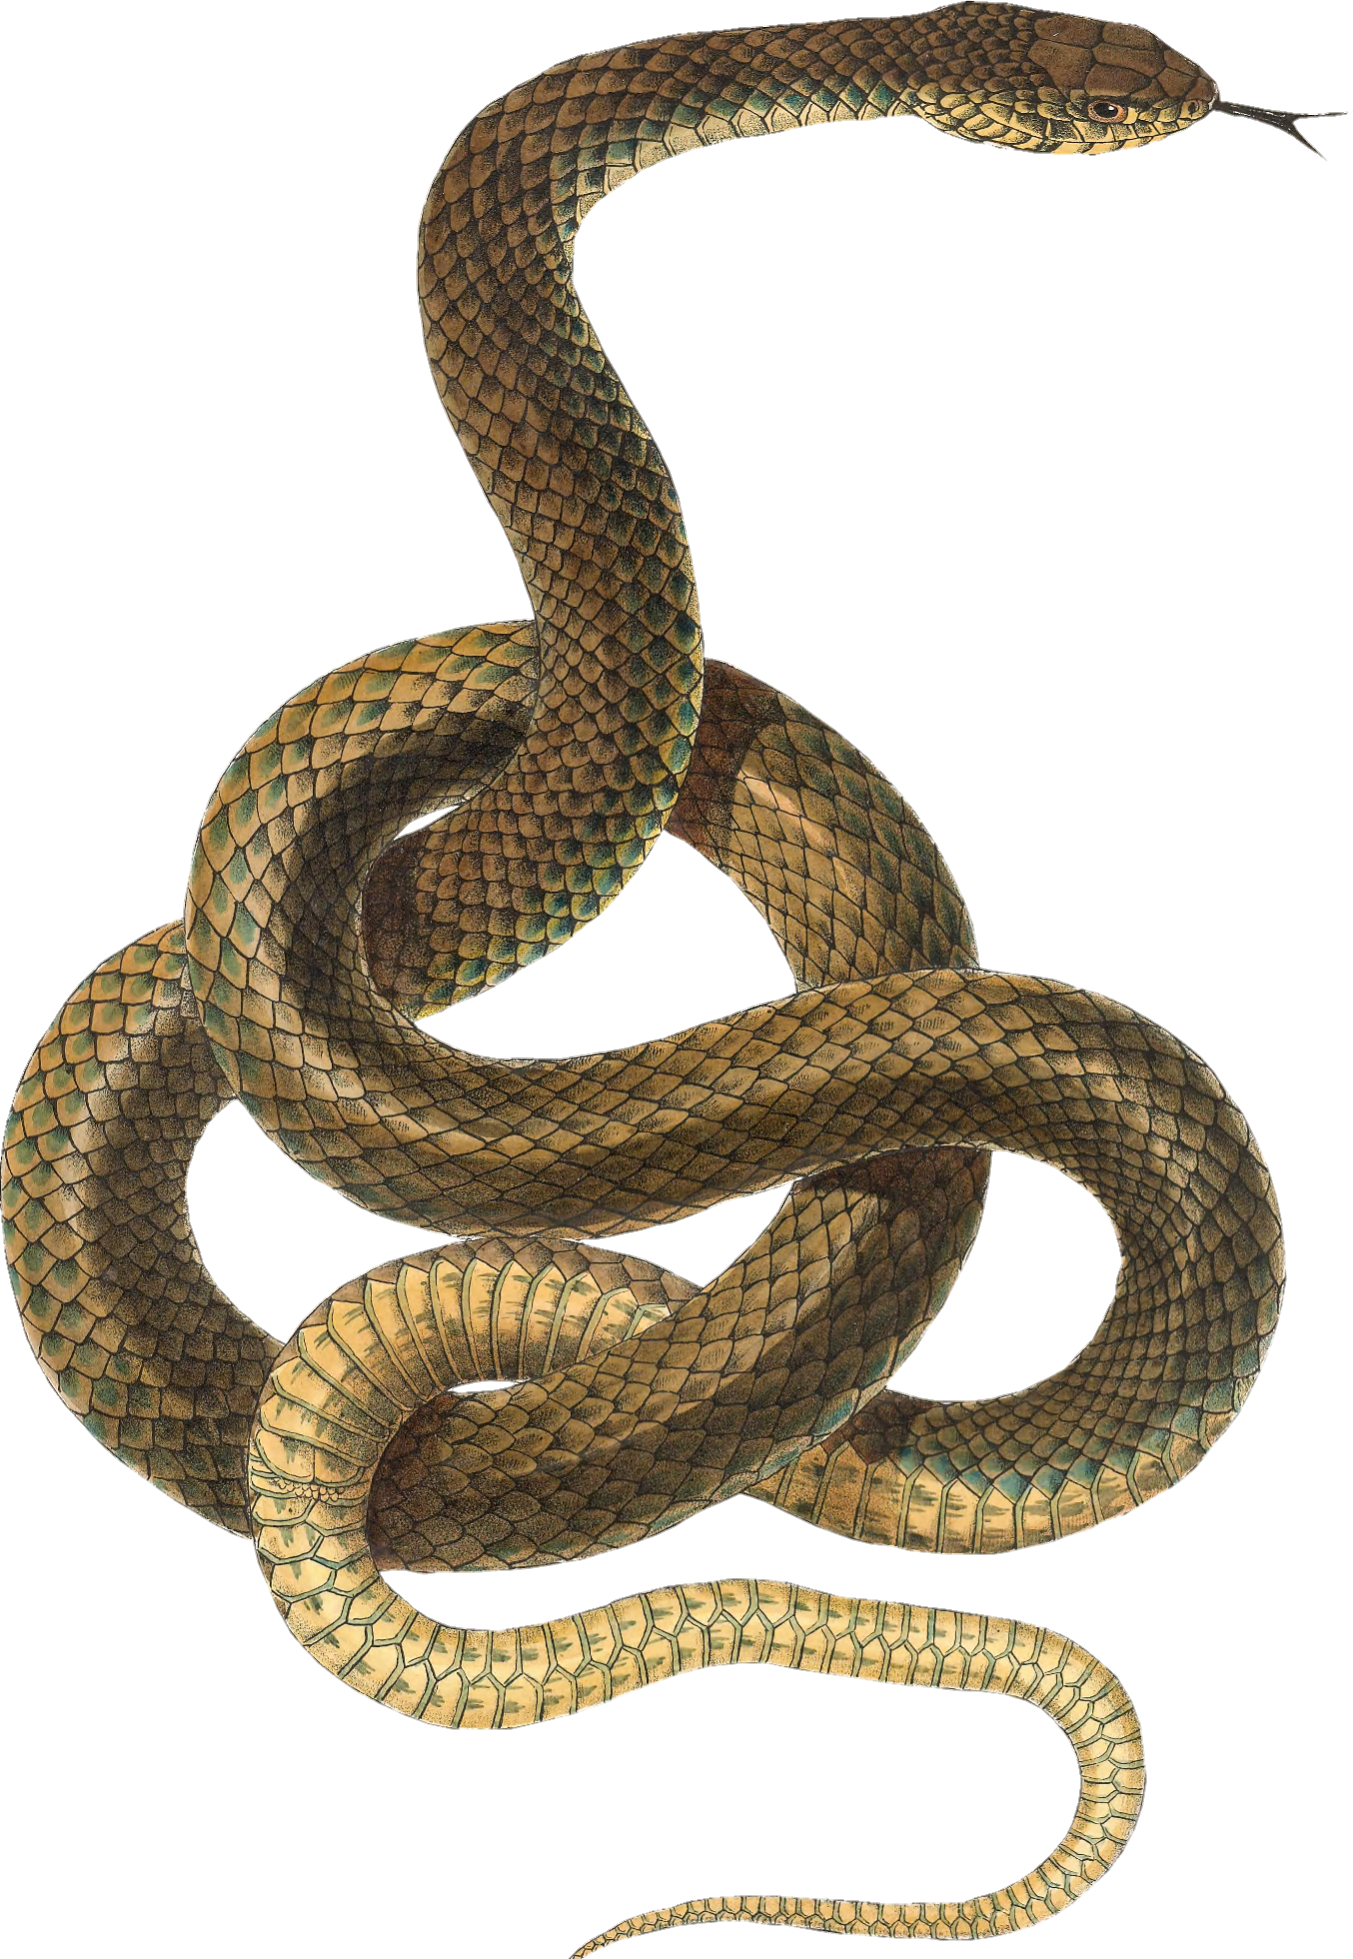 snake-png-image-pngfre-3